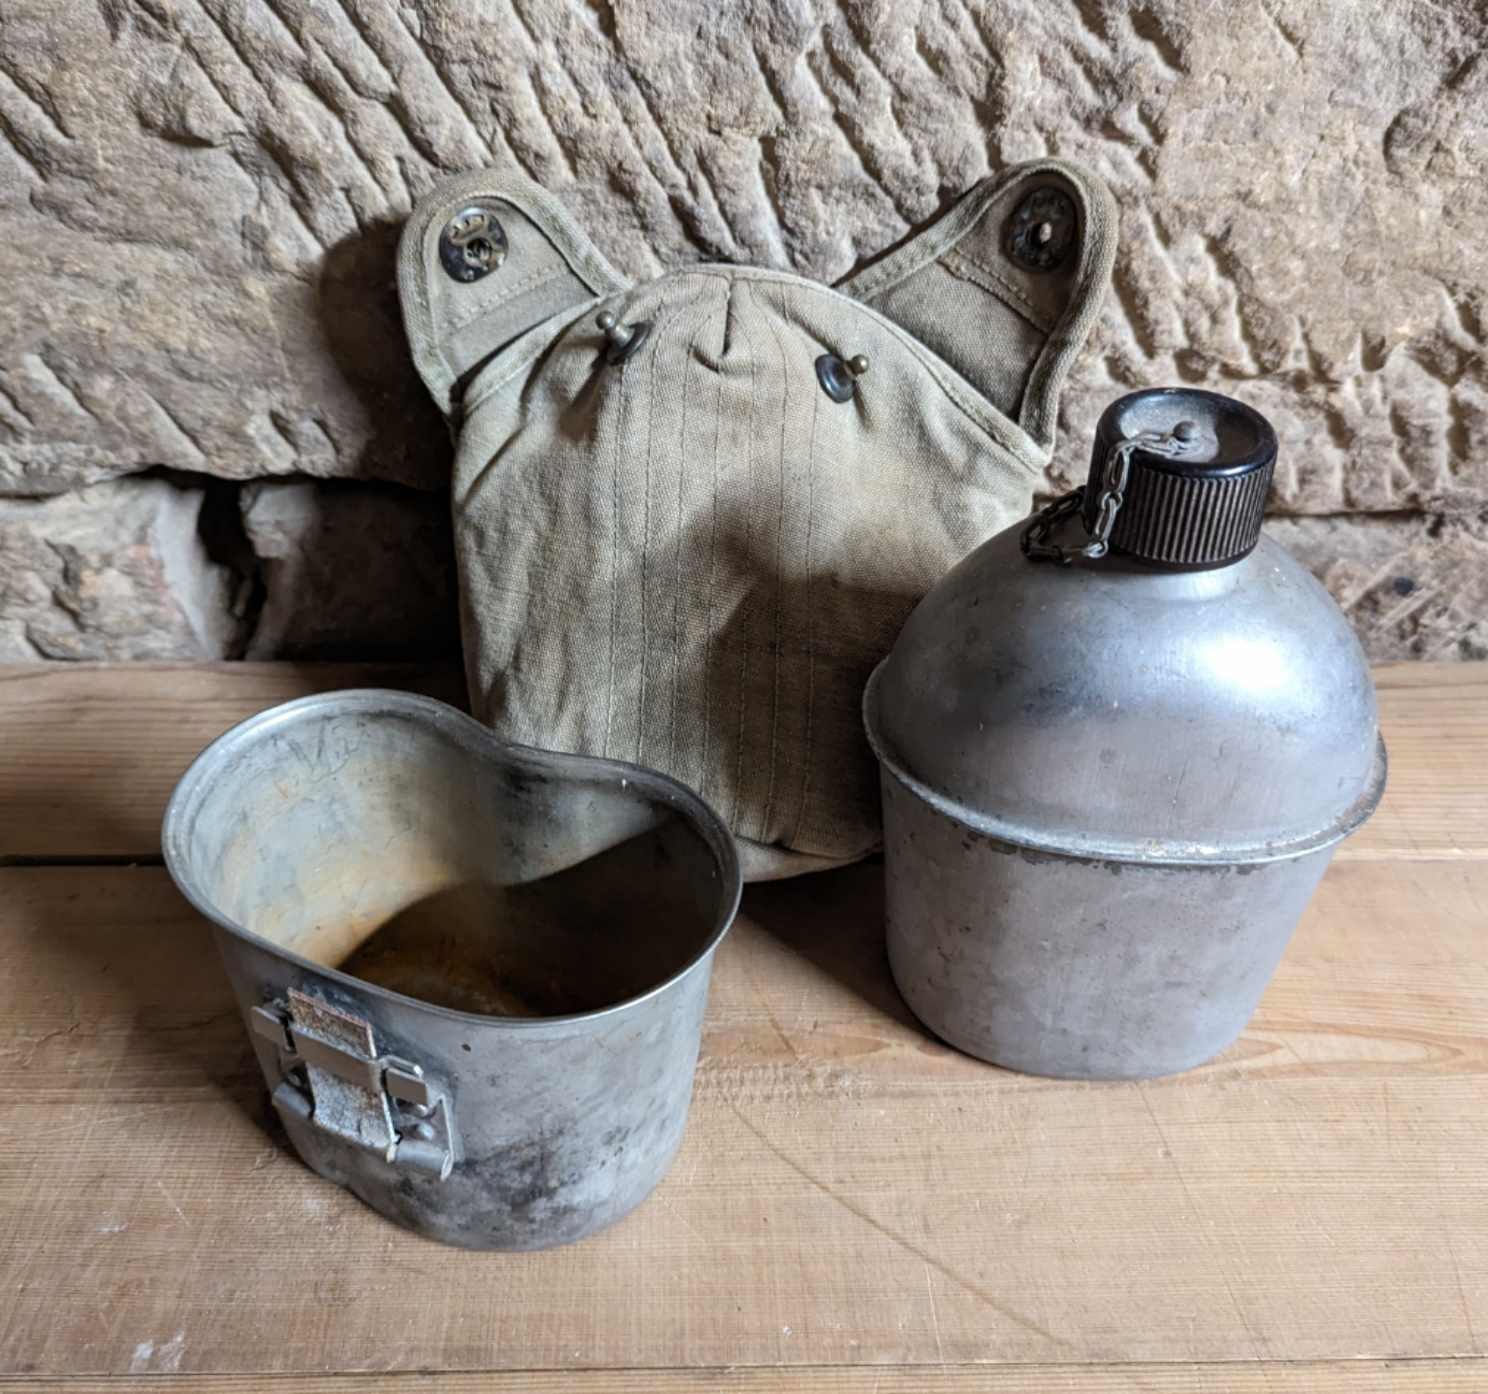 militaria : Gourde US complète od3 / US ww2 complete canteen